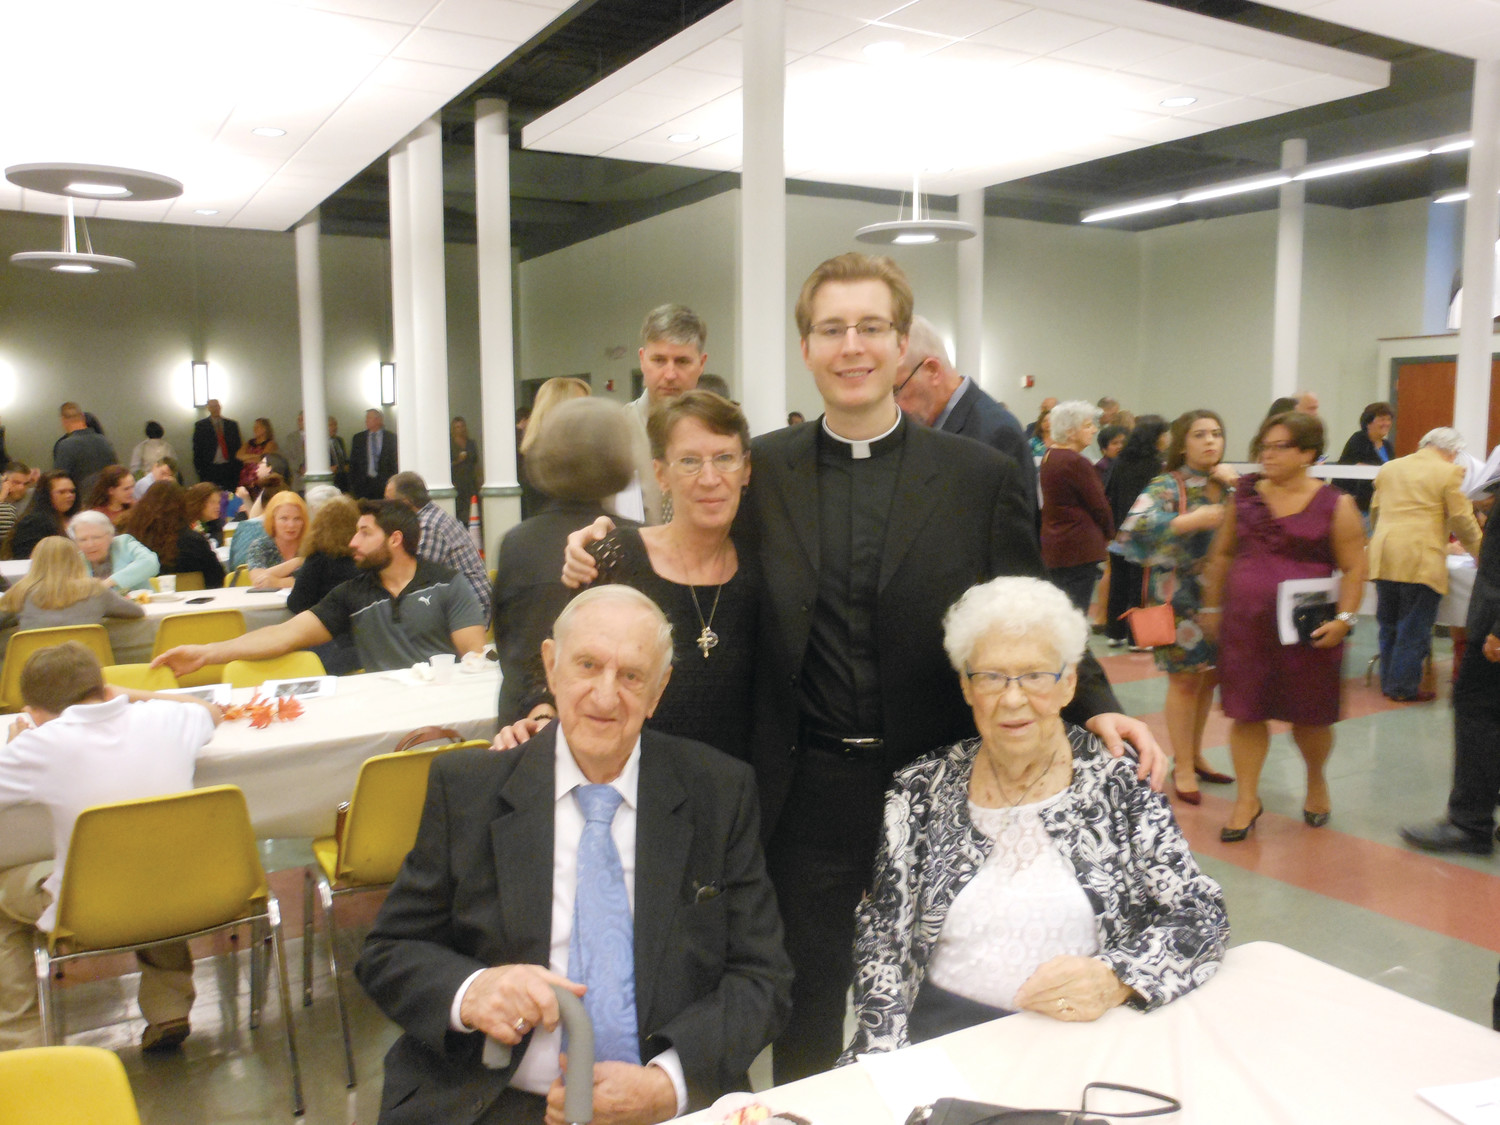 Among the longest married couples at Sunday’s event, Clarence and Mary Barrow (pictured with daughter Mary Barrow and grandson Father Joshua Barrow) have been together for 65 years.  The two planned to renew their vows in a Mass celebrated by their grandson in the days following the Mass. Asked what the secret to such a long and happy marriage was, Clarence replied laconically: “Just keep going.”